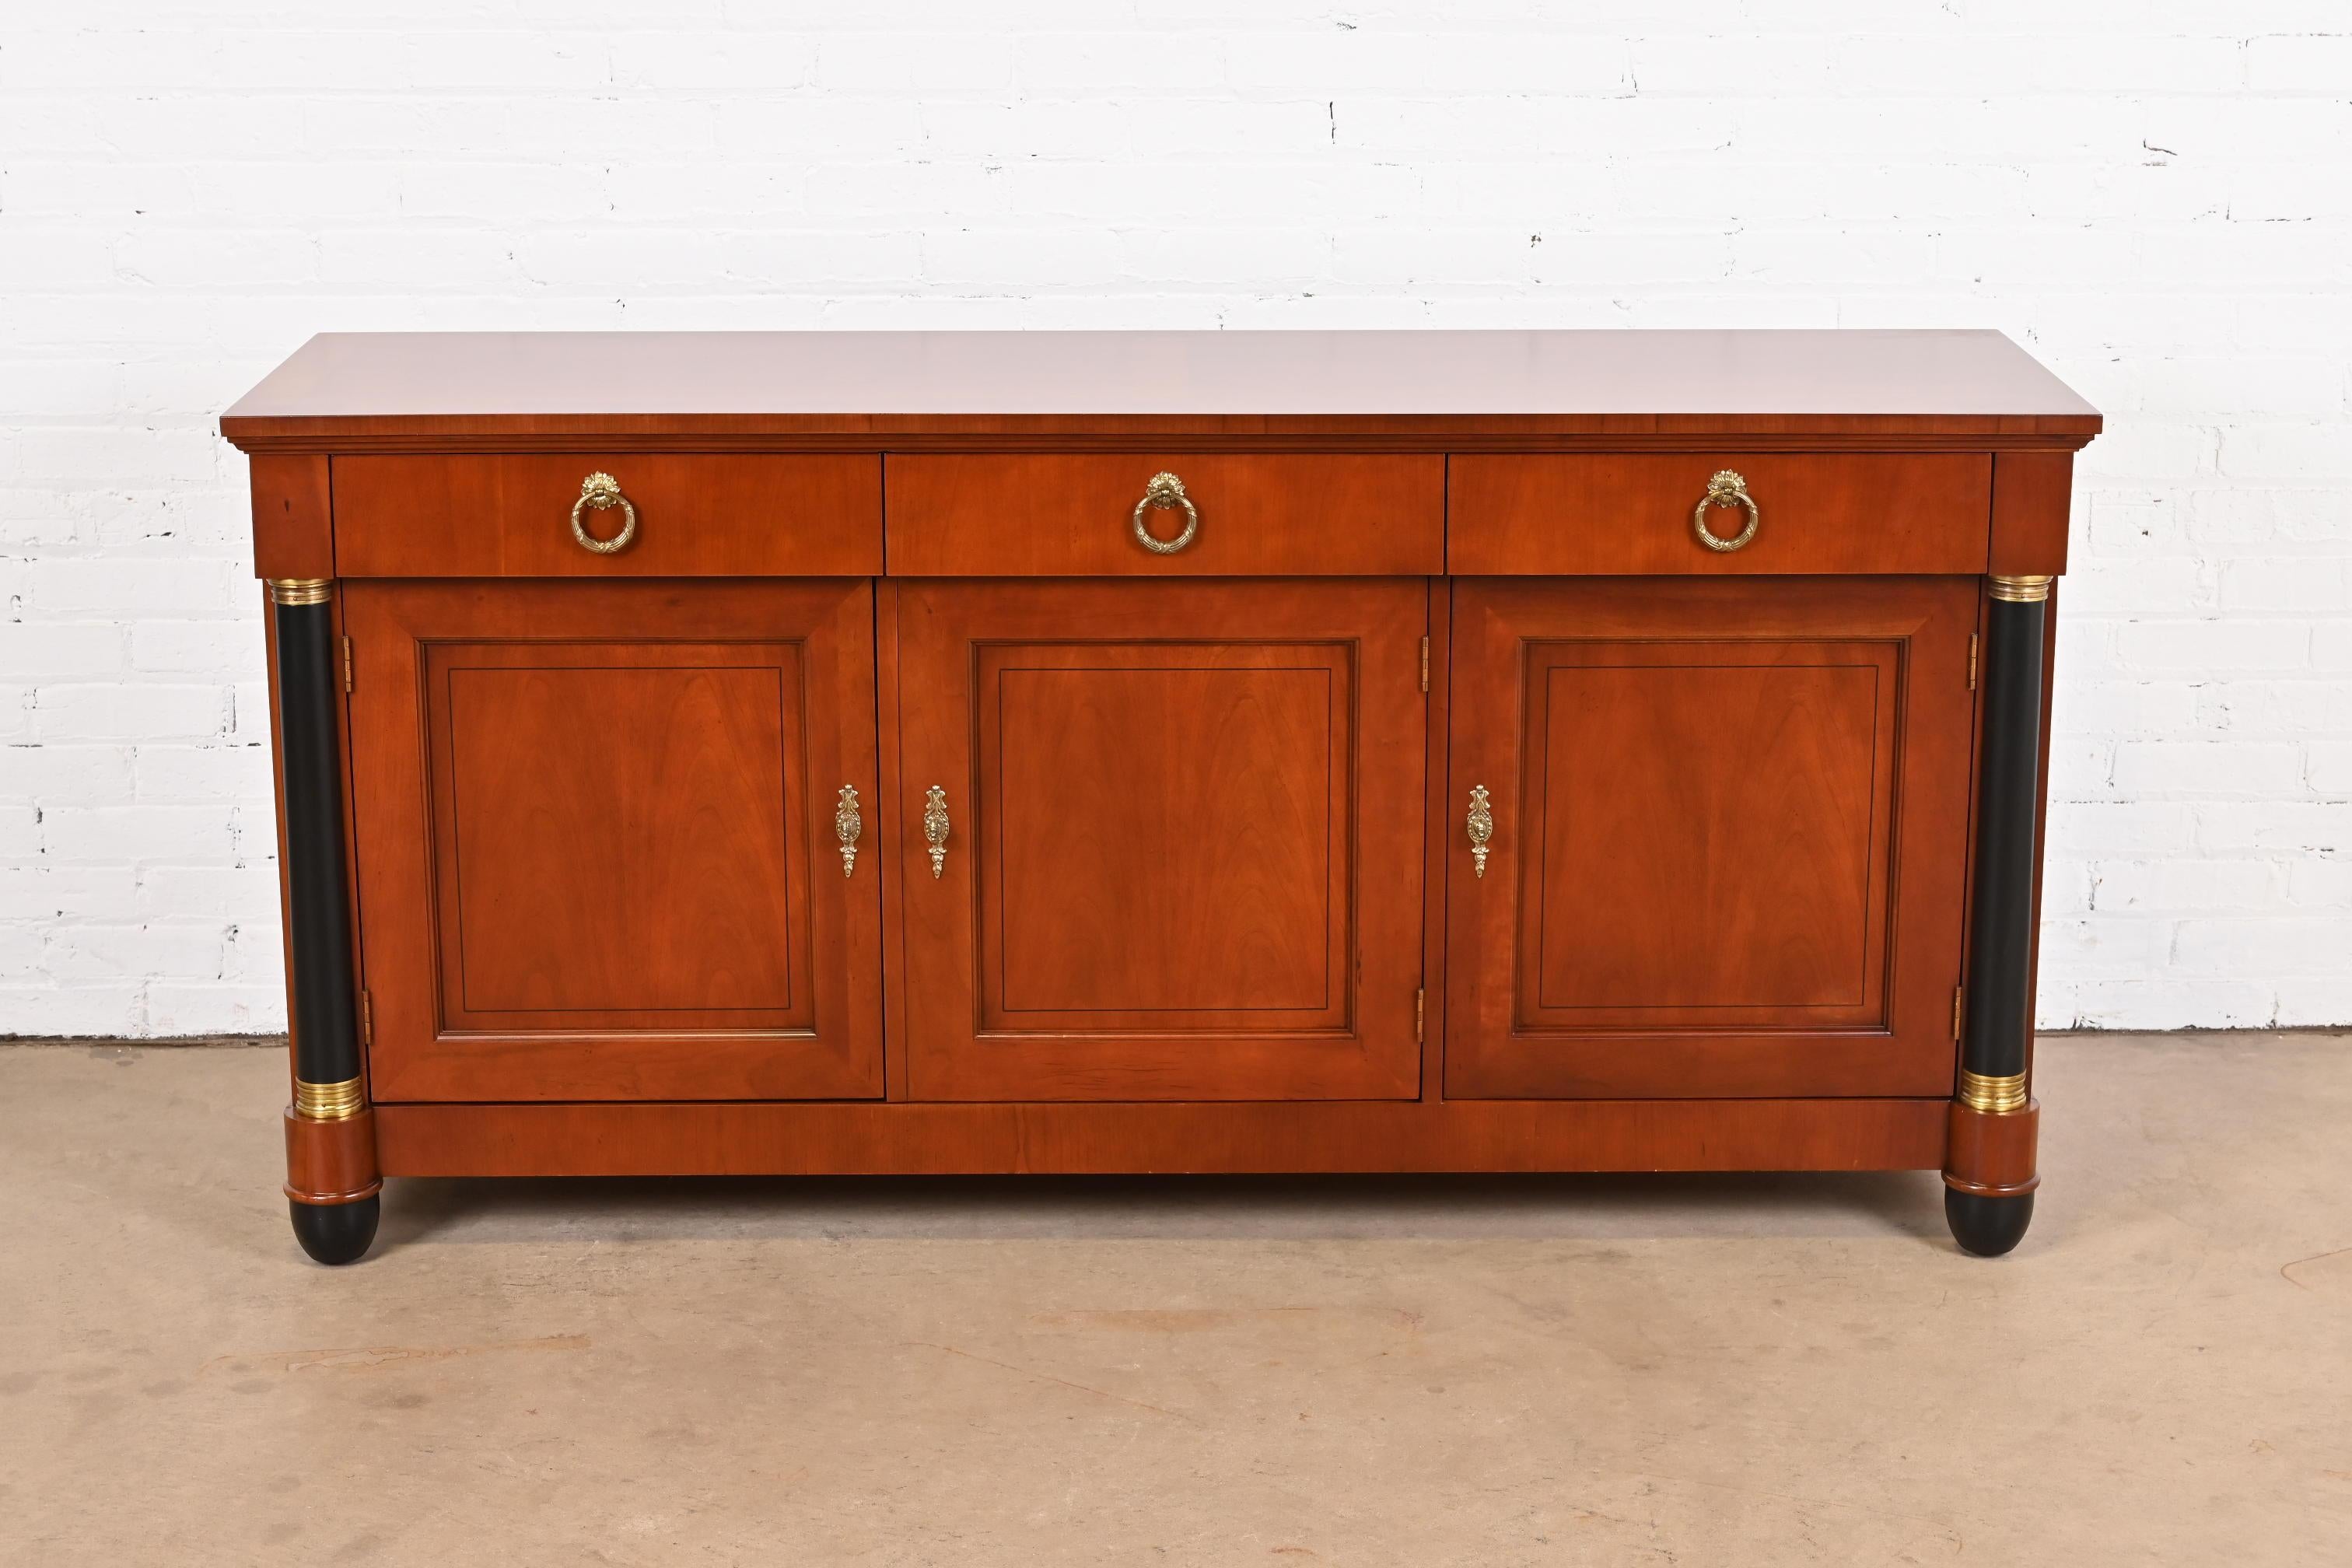 A gorgeous Neoclassical or Empire style sideboard, credenza, or bar cabinet

By Baker Furniture, 